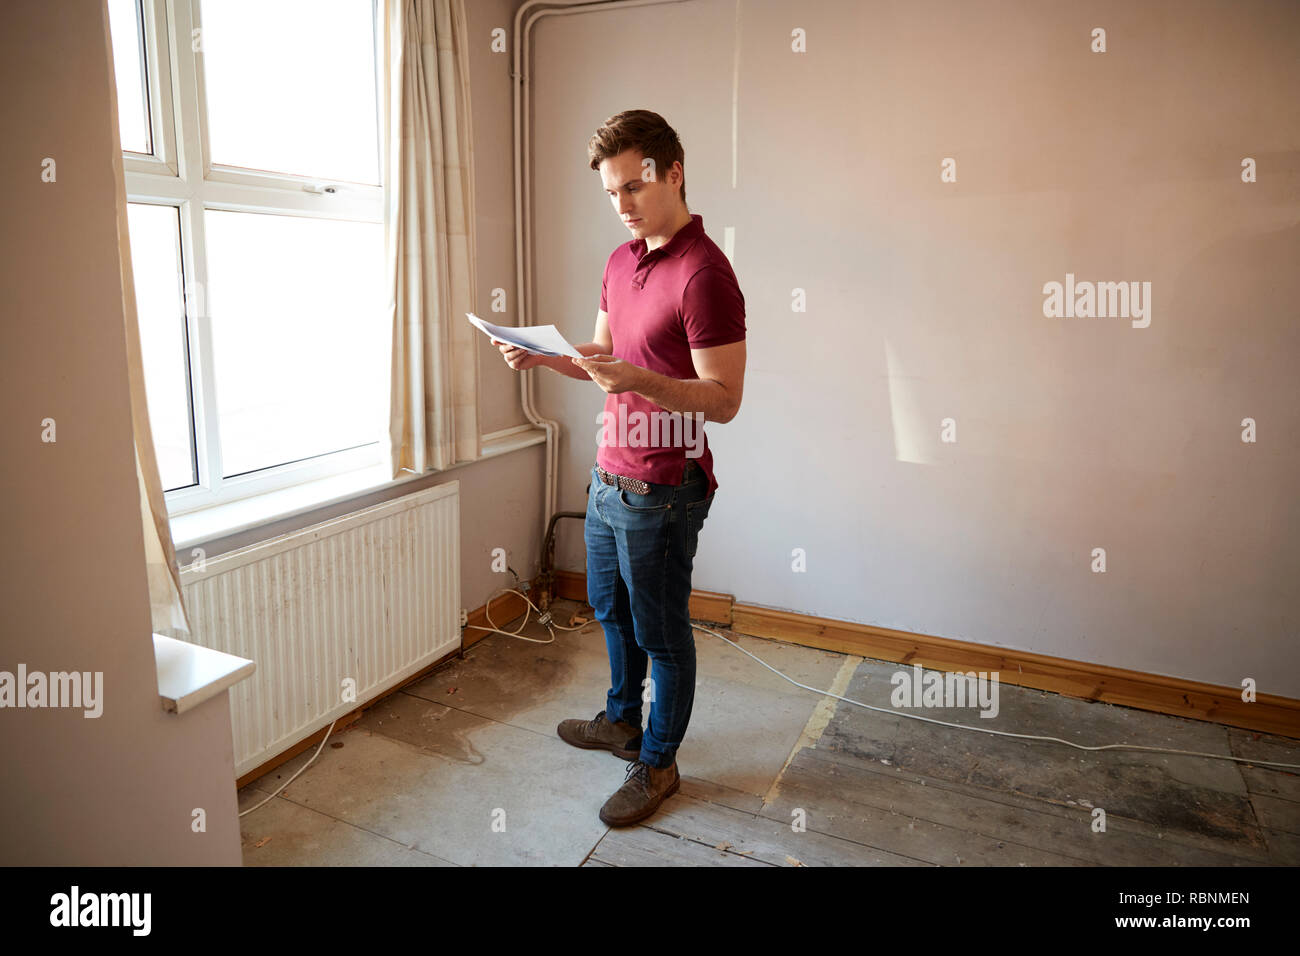 Male First Time Buyer Looking At House Survey In Room To Be Renovated Stock Photo